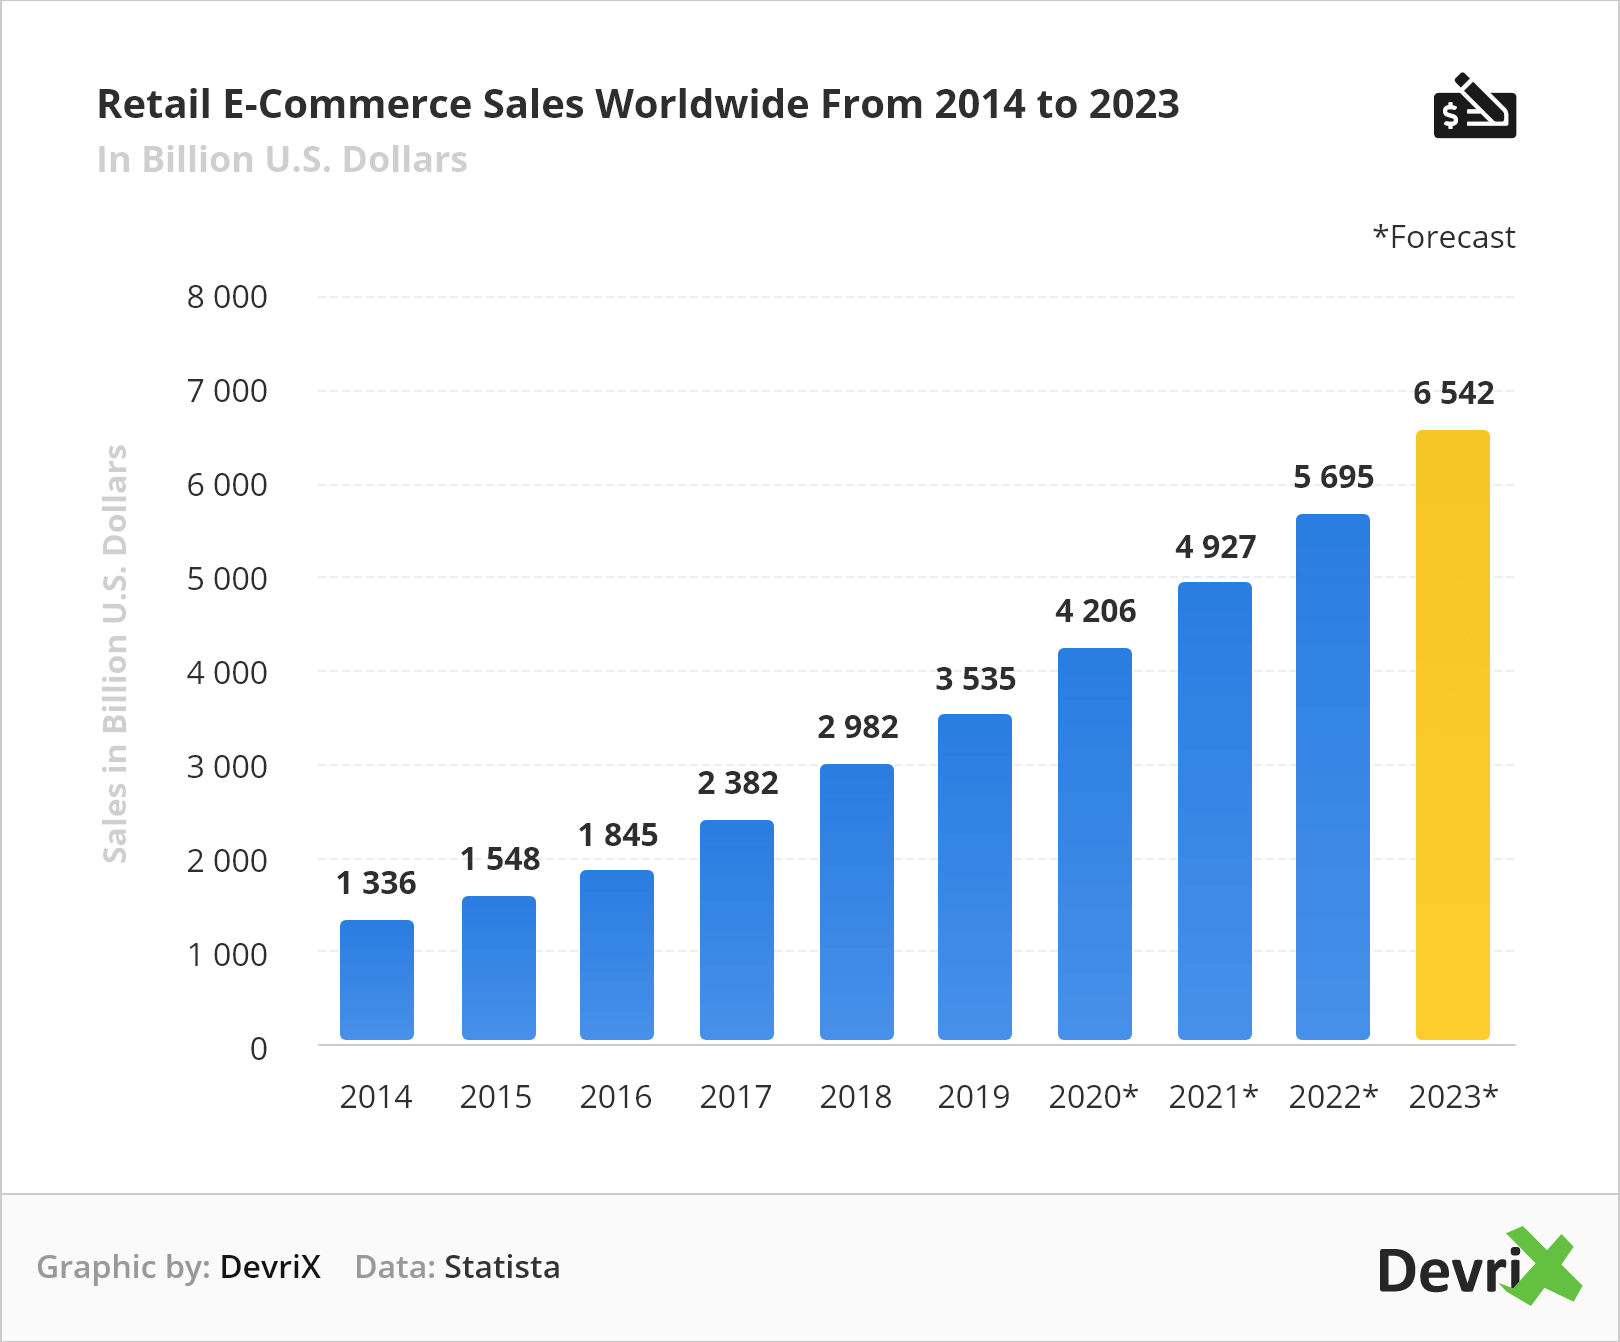 E-Commerce is on the rise